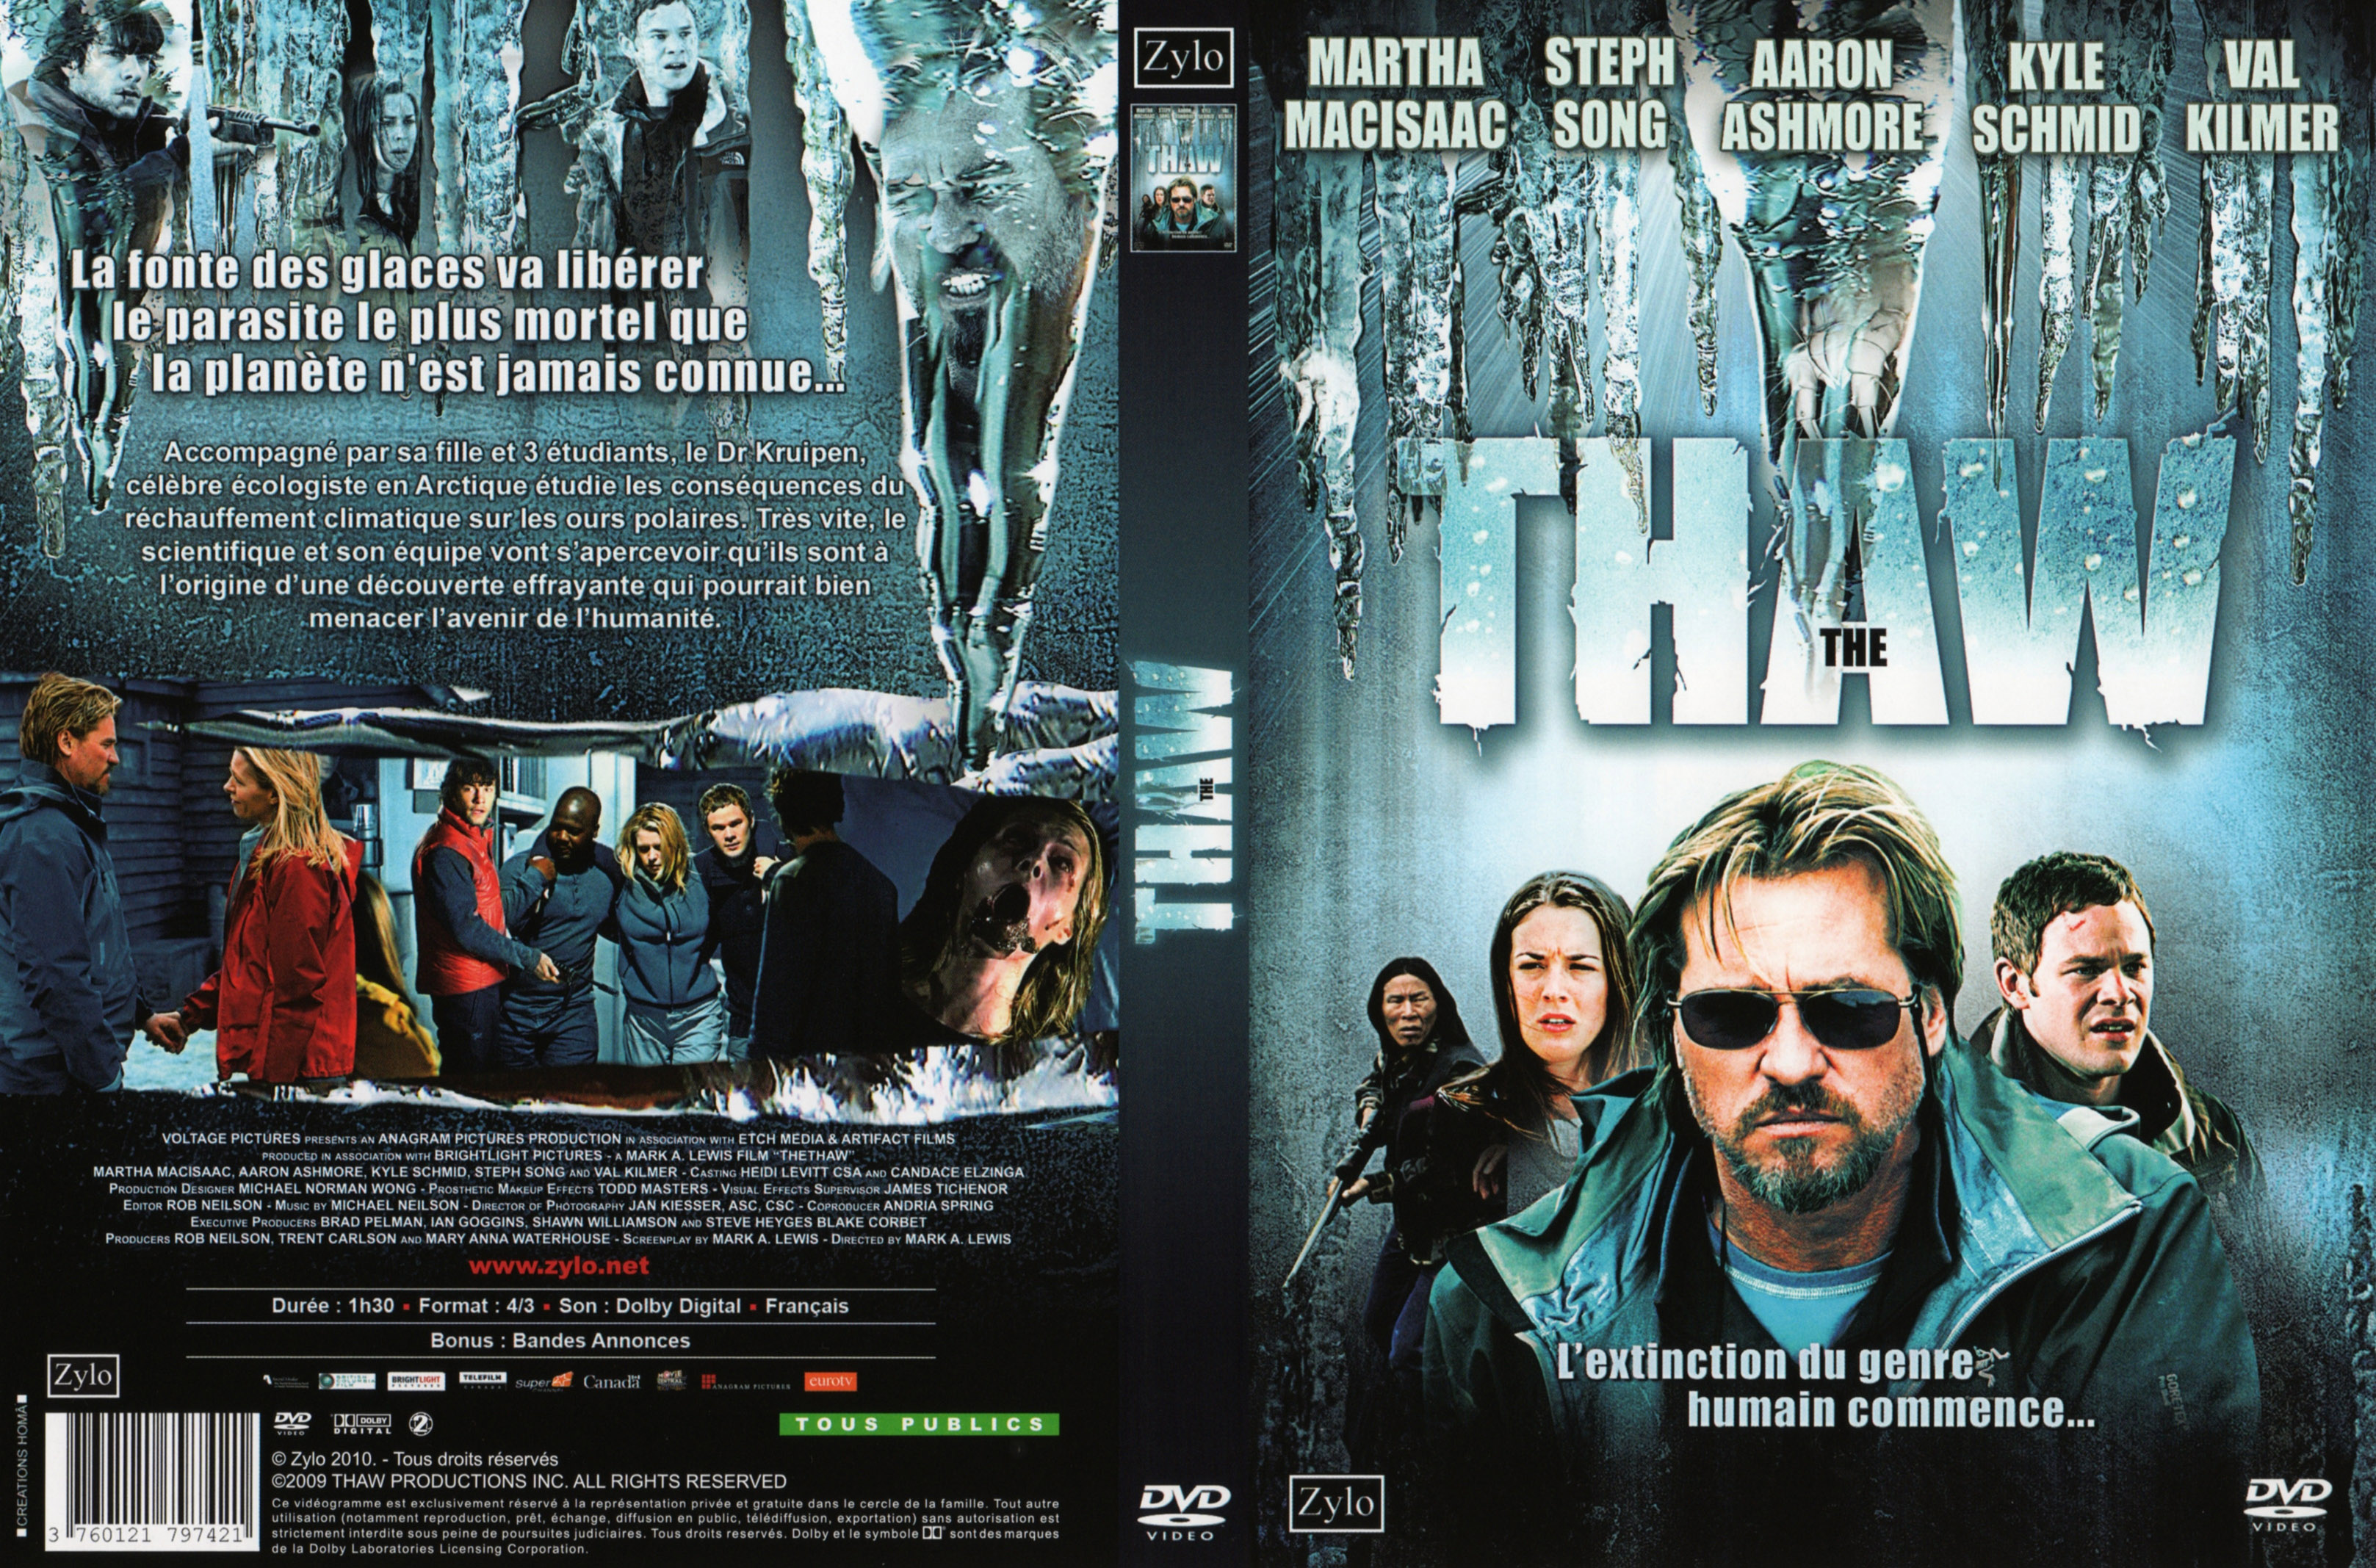 Jaquette DVD The thaw